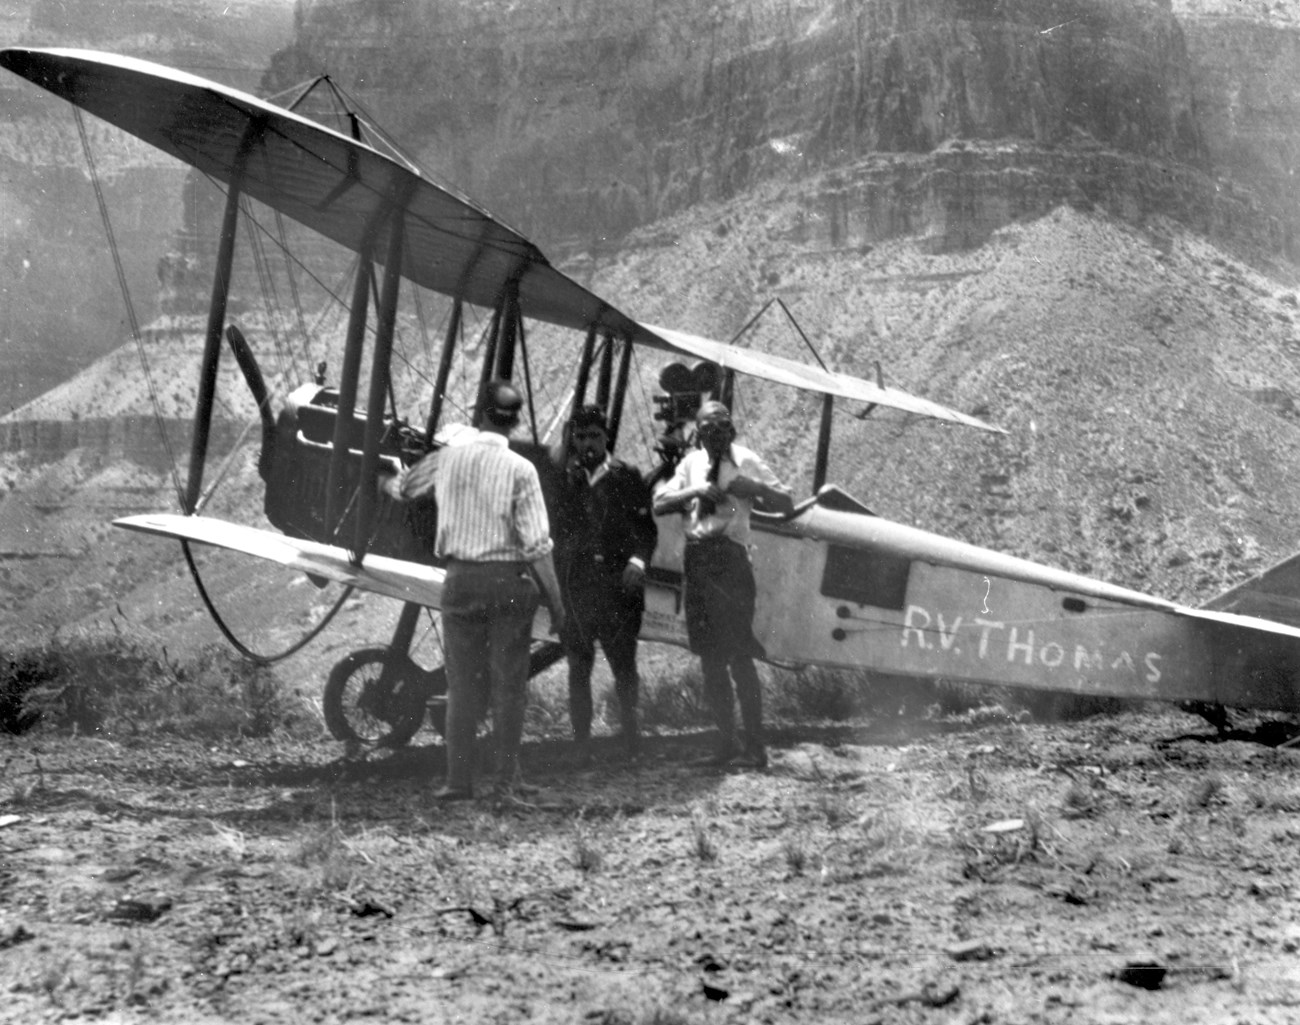 Three people standing next to a biplane.